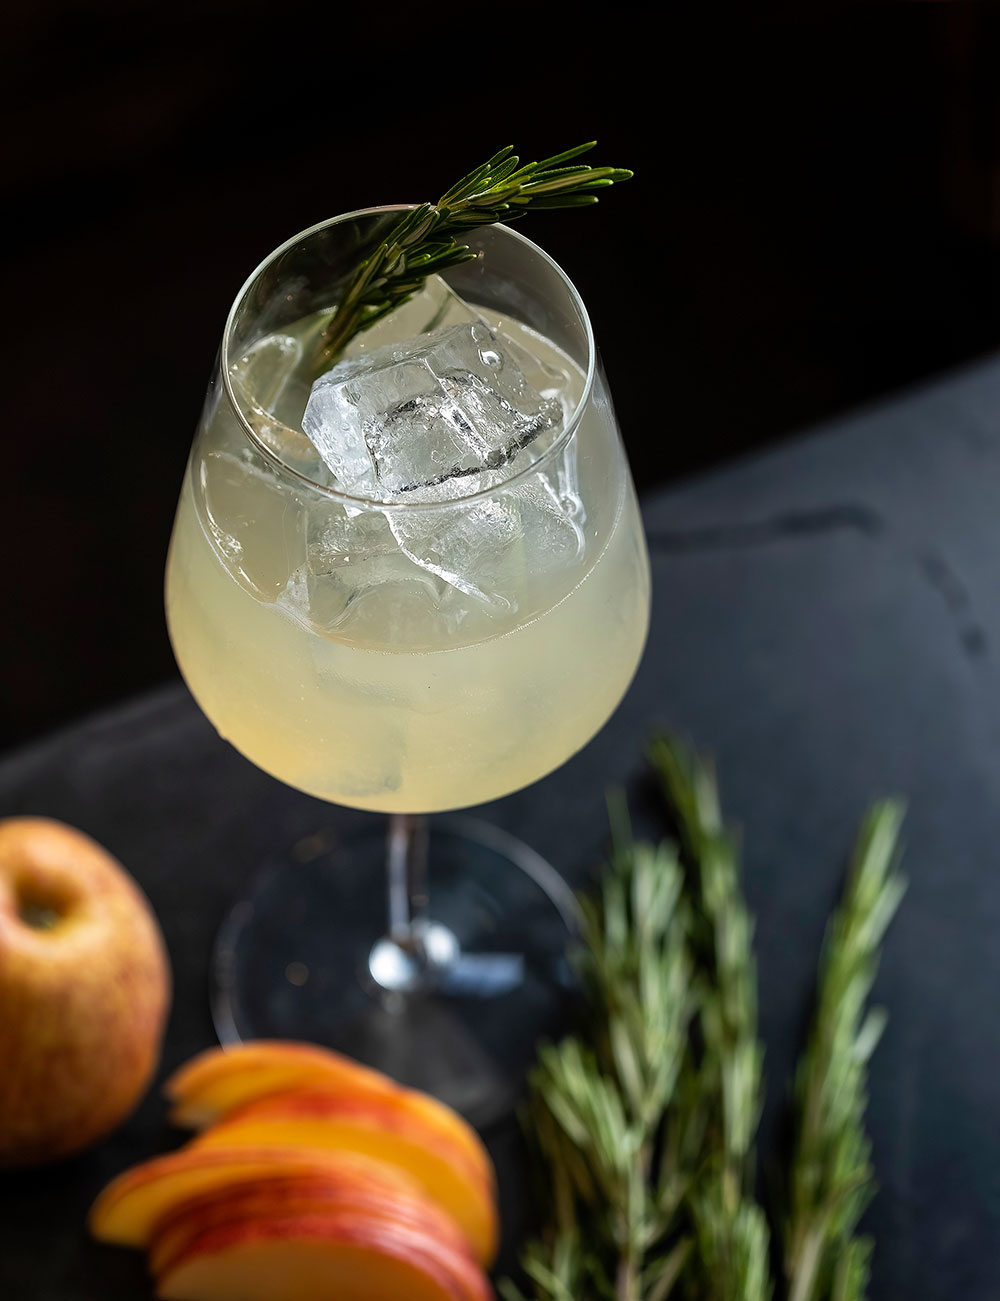 The Little Johnny at Crawford and Son is made with apple cider, ginger, rosemary, and miso.